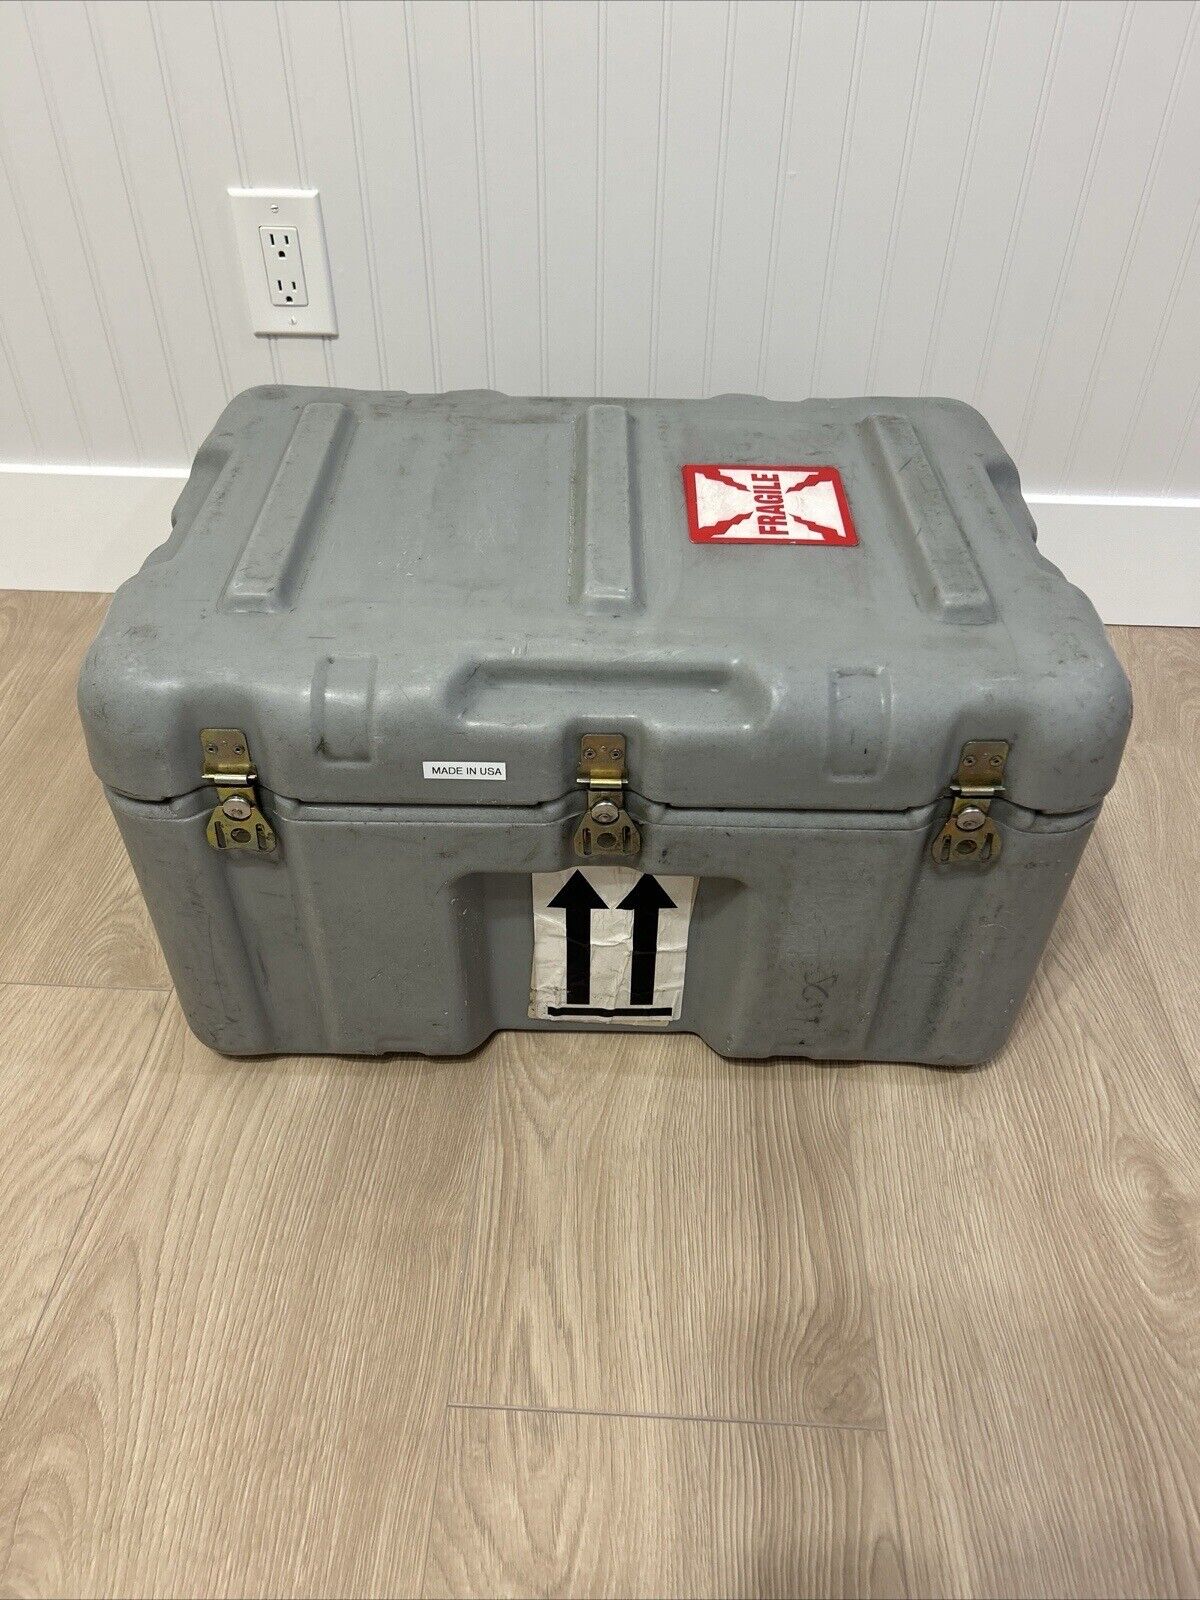 Hardigg Case Pelican Medchest Military Footlocker Case Weather Tight 23x16x13